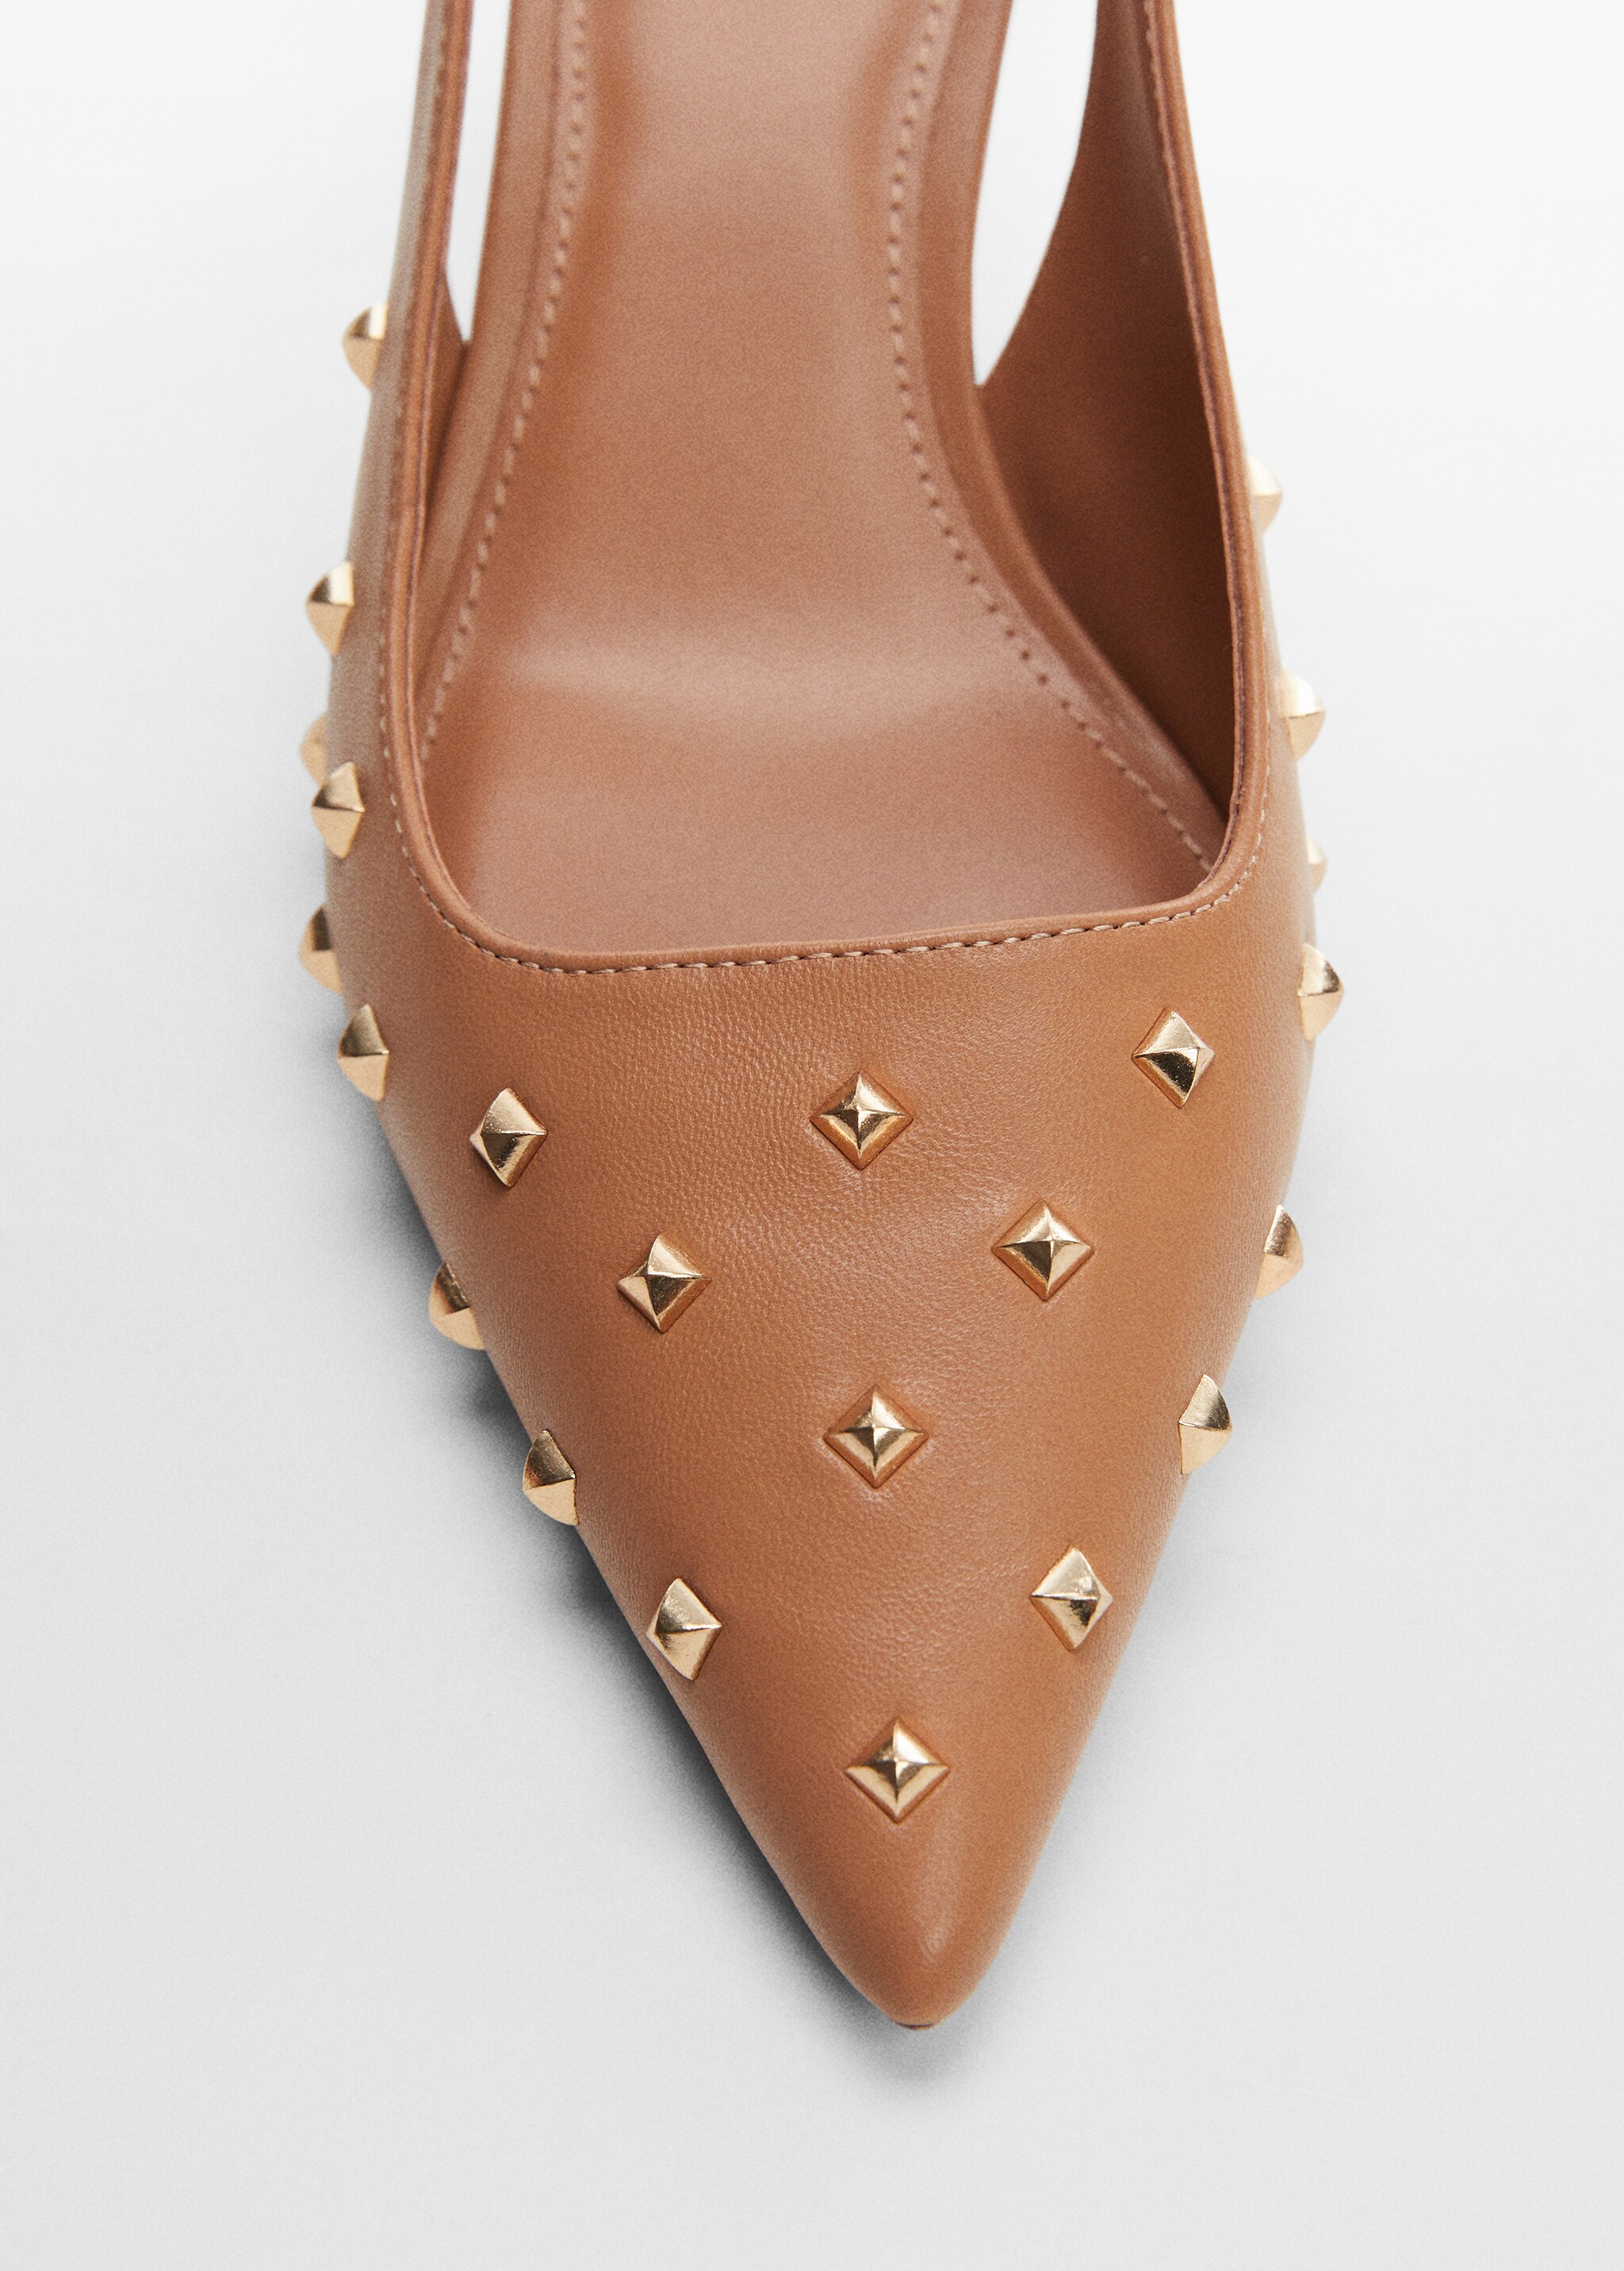 Studded slingback shoes - Details of the article 2